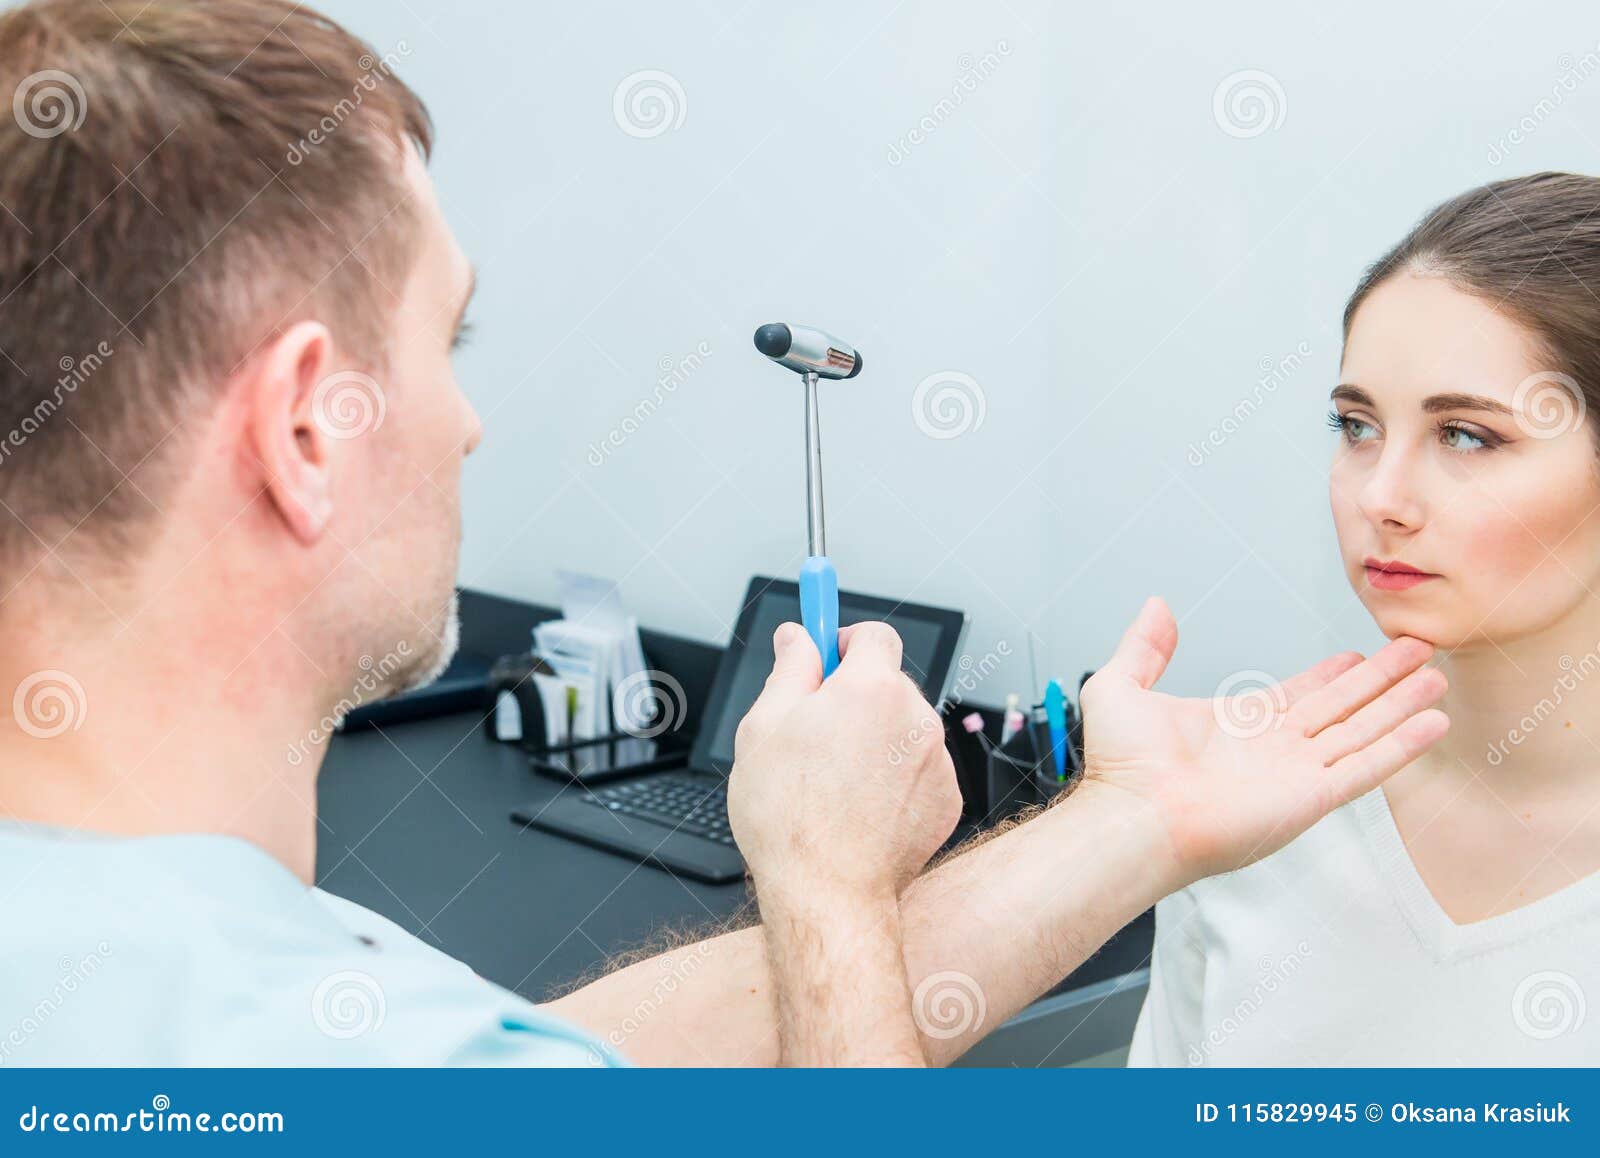 Physical Exam Images, Stock Photos & Vectors | Shutterstock